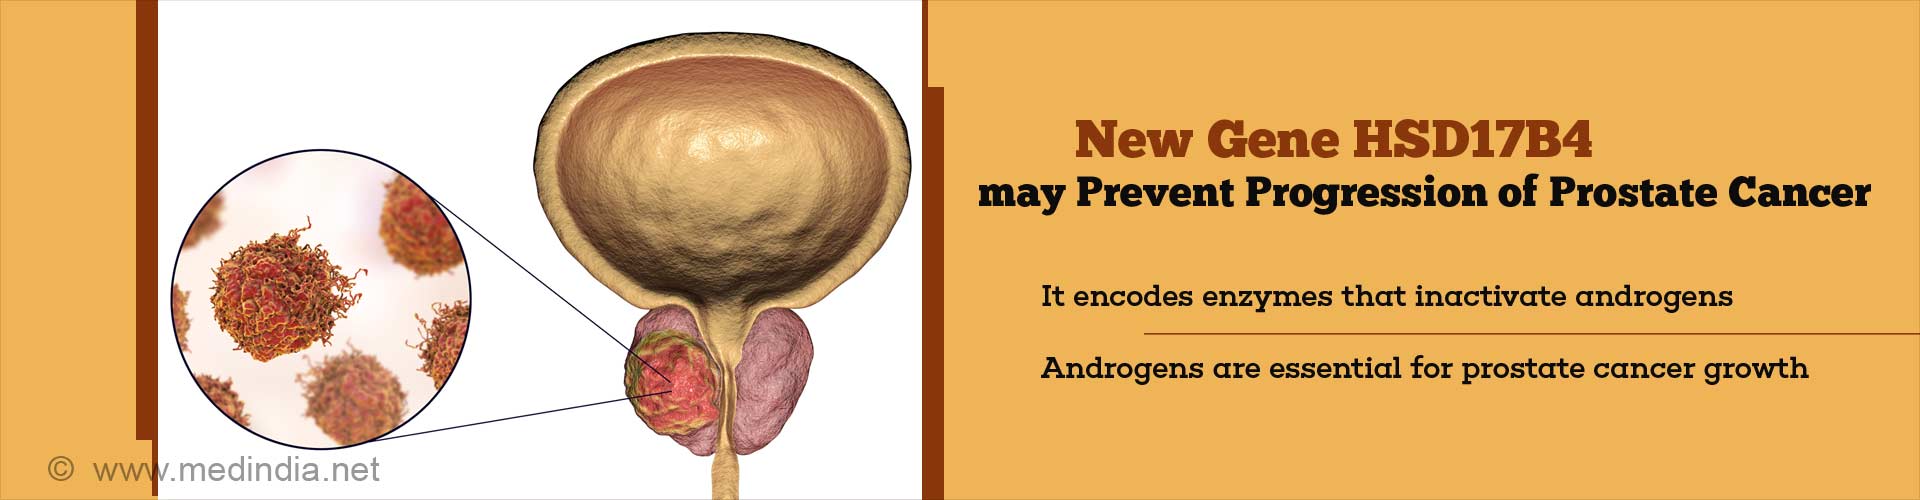 new gene HSD17B4 may prevent progression of prostate cancer
- it encodes enzymes that inactivate androgens
- androgens are essential for prostate cancer growth